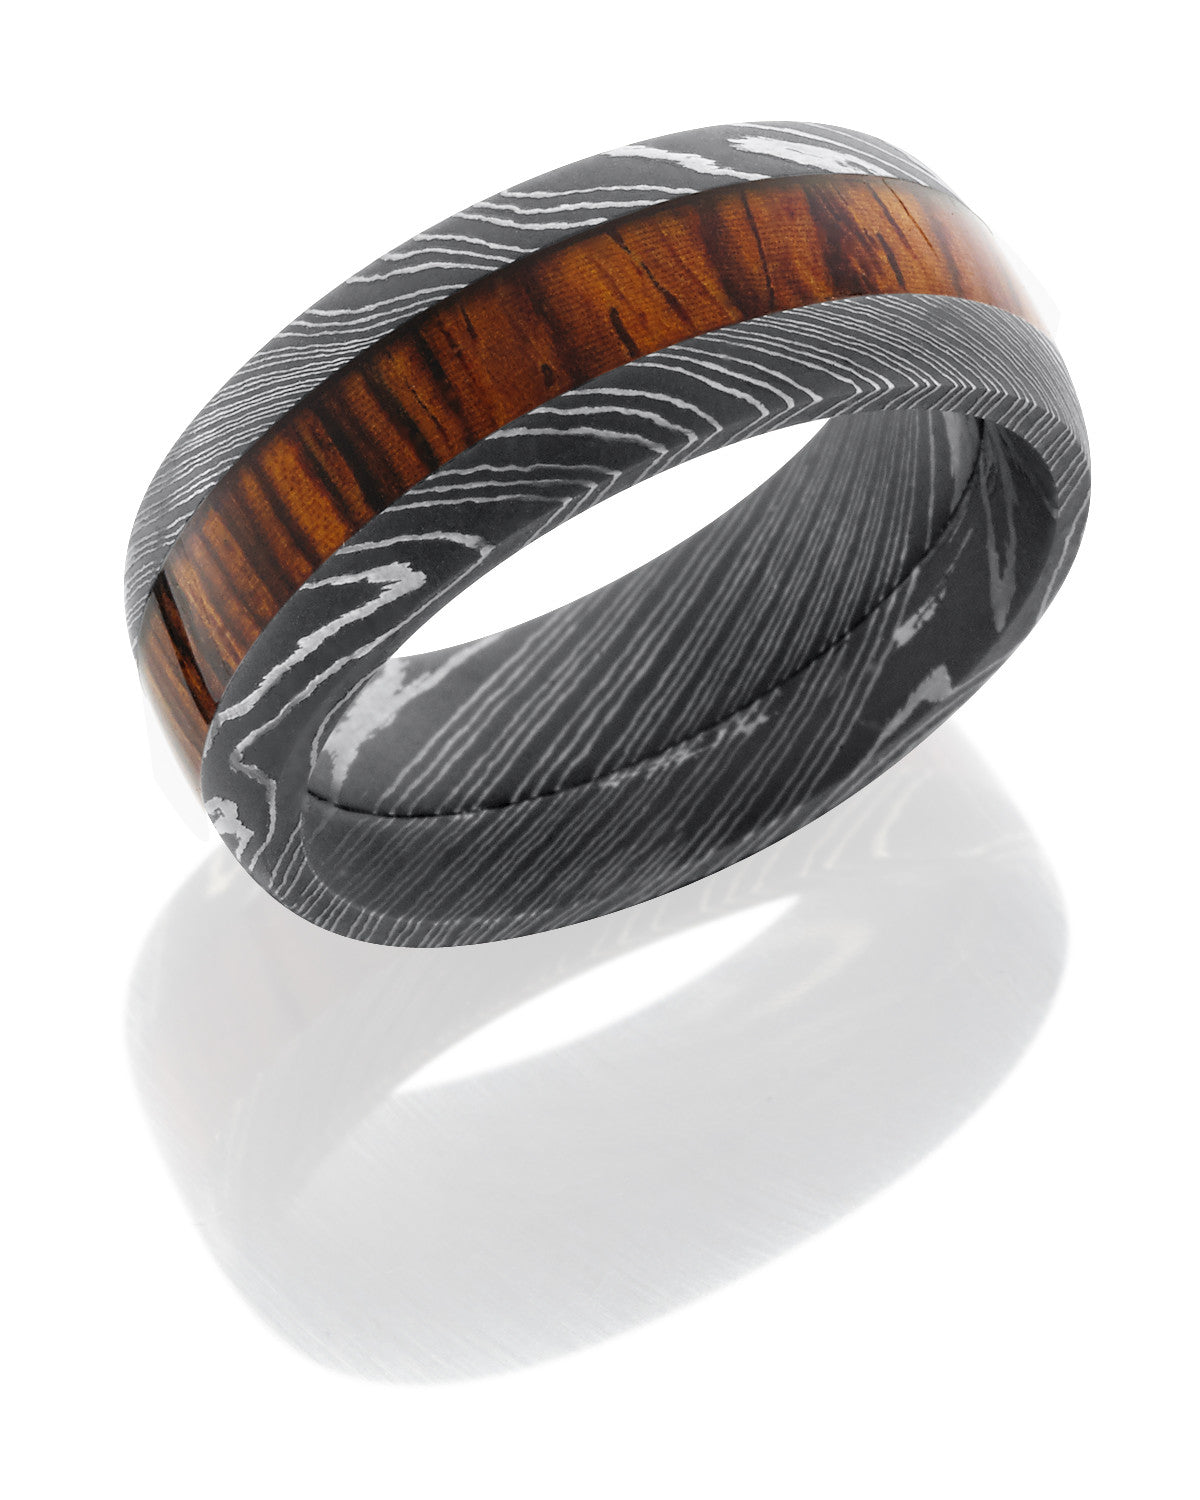 Damascus Steel 9mm Band with Mexican Cocobollo Wood Inlay-Lashbrook-Howard's Diamond Center